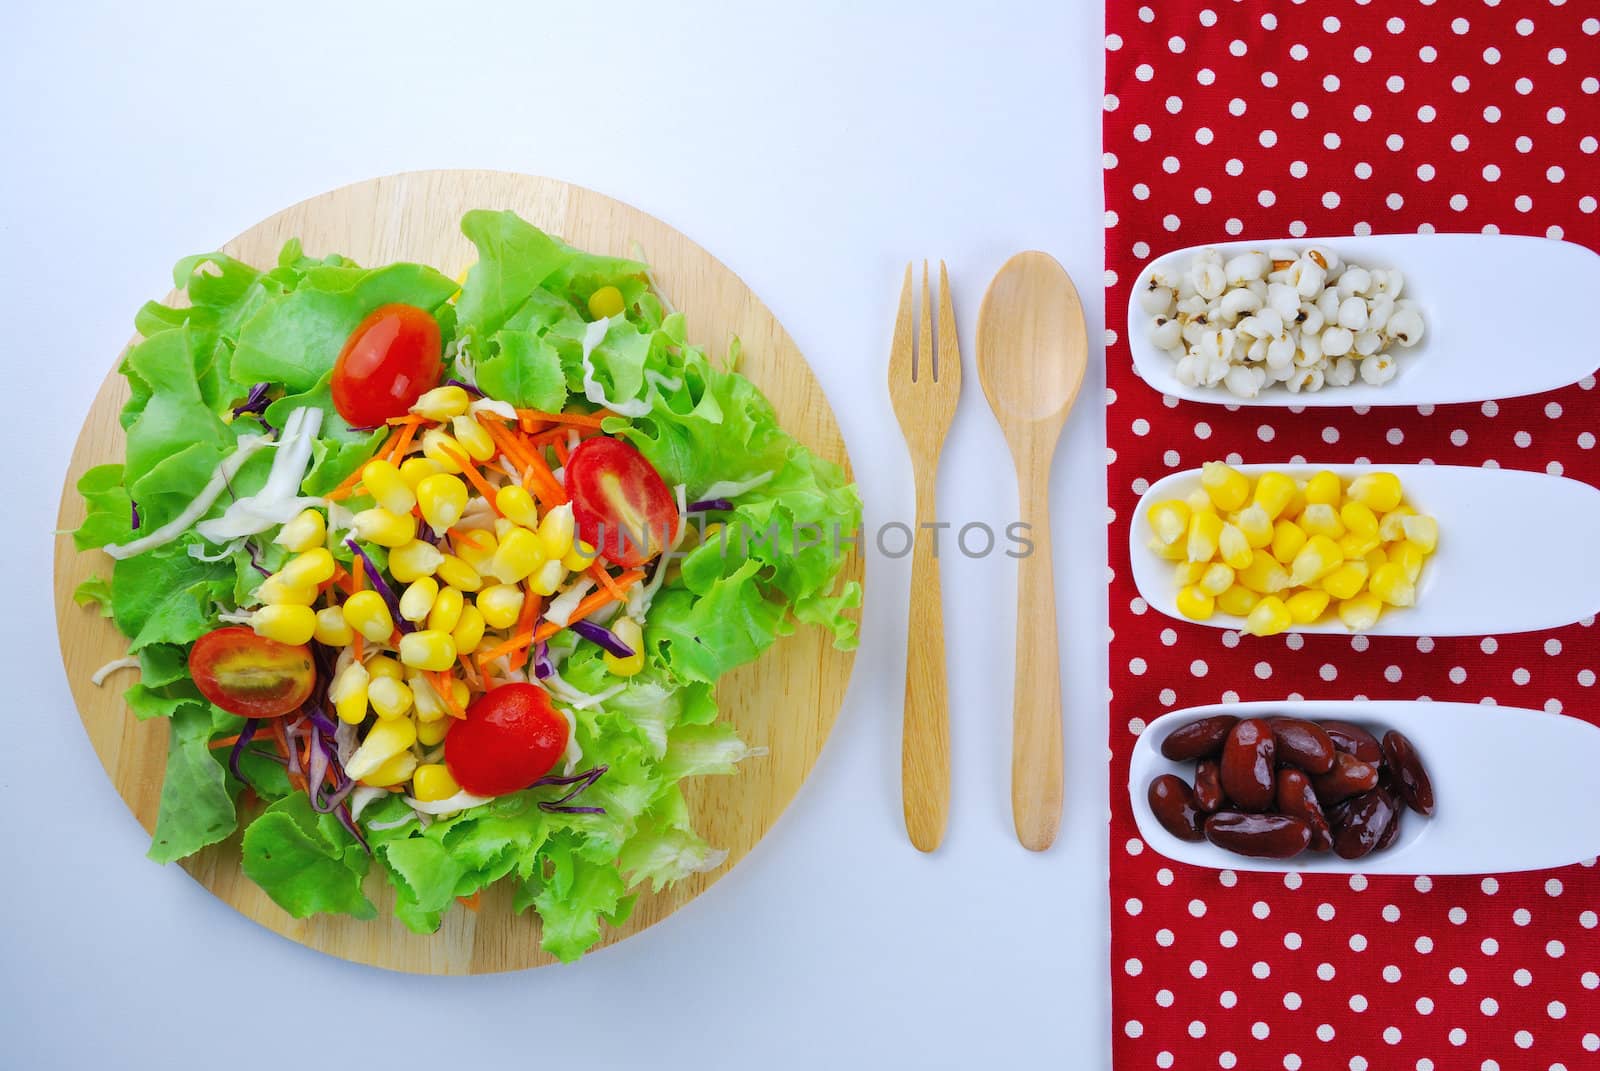 Fresh vegetable salad with corn,carrot,tomato,green oak,red oak, by teen00000